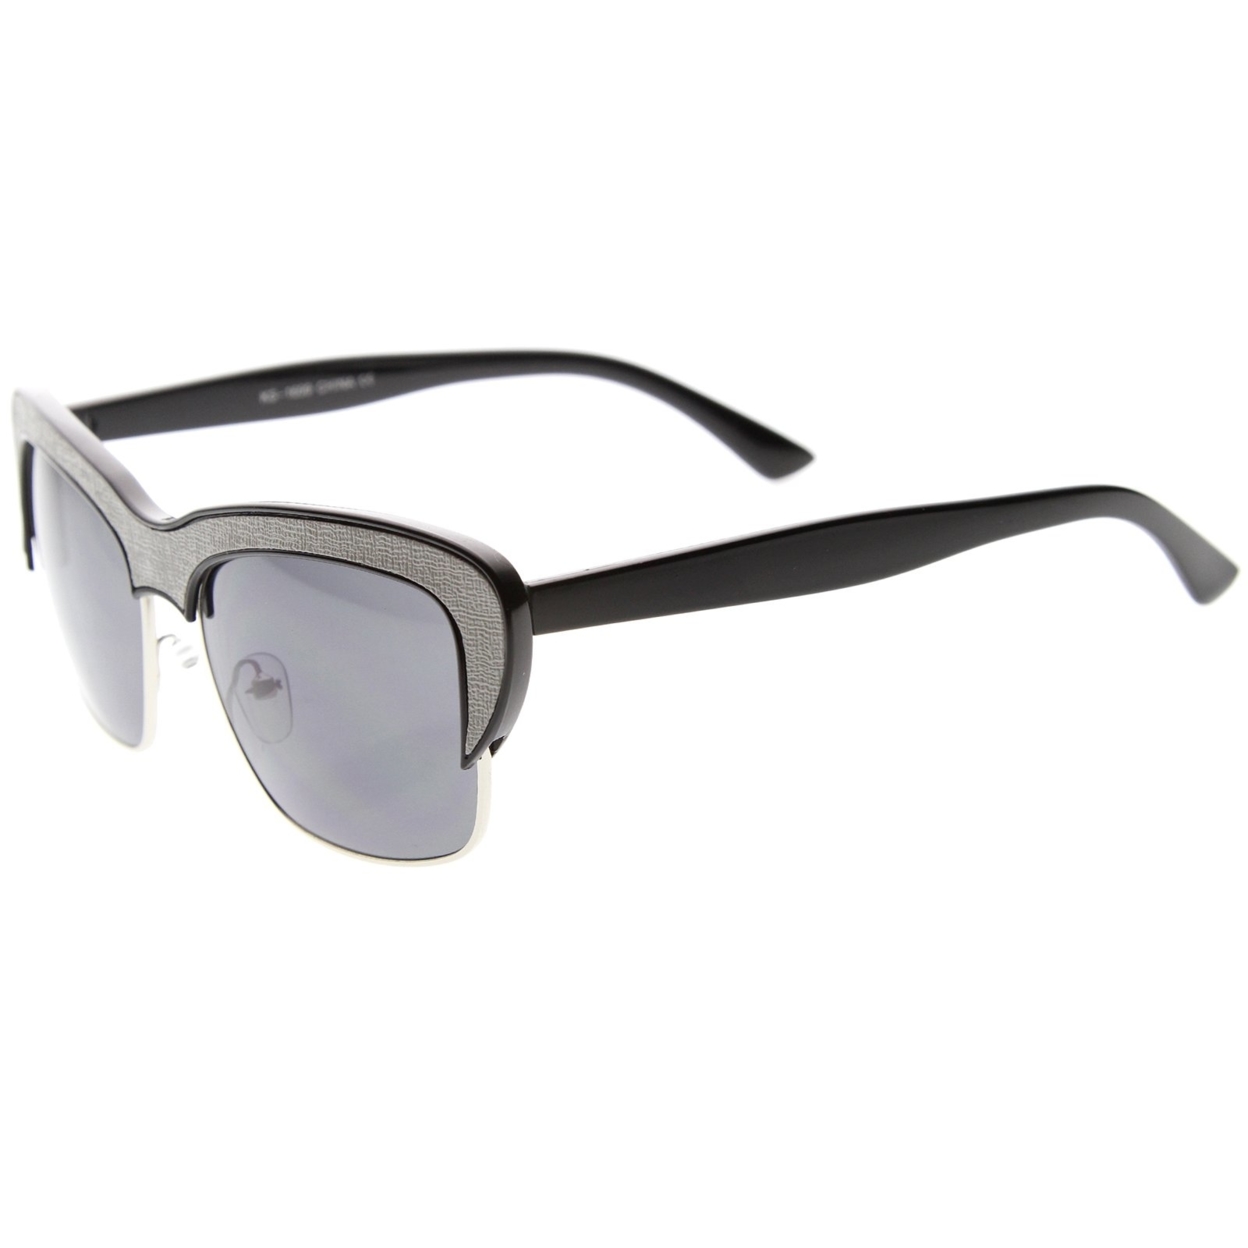 Womens Semi-Rimless Sunglasses With UV400 Protected Composite Lens - Black-Grey / Ice